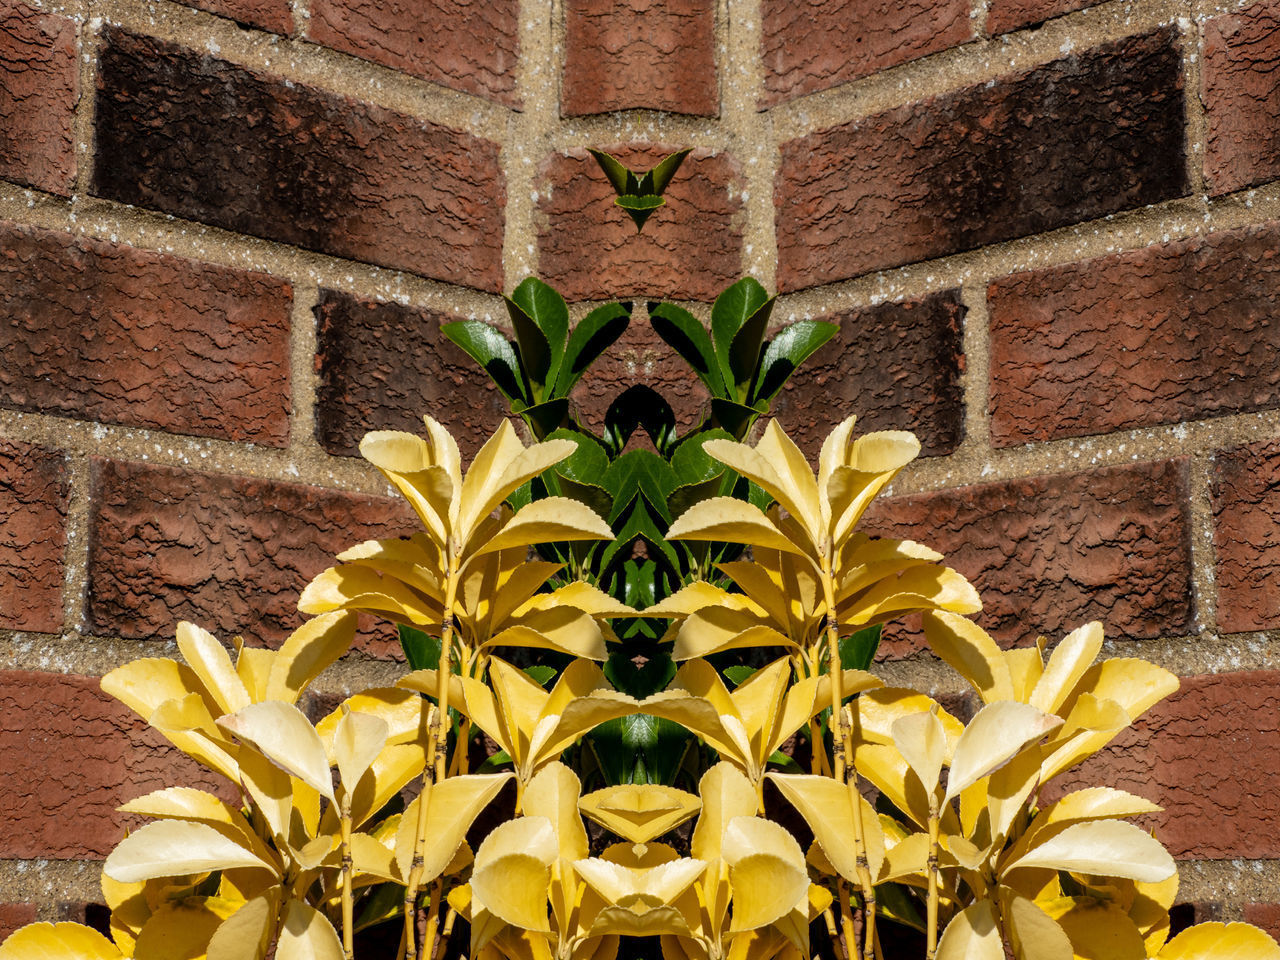 CLOSE-UP OF YELLOW FLOWERING PLANTS AGAINST WALL